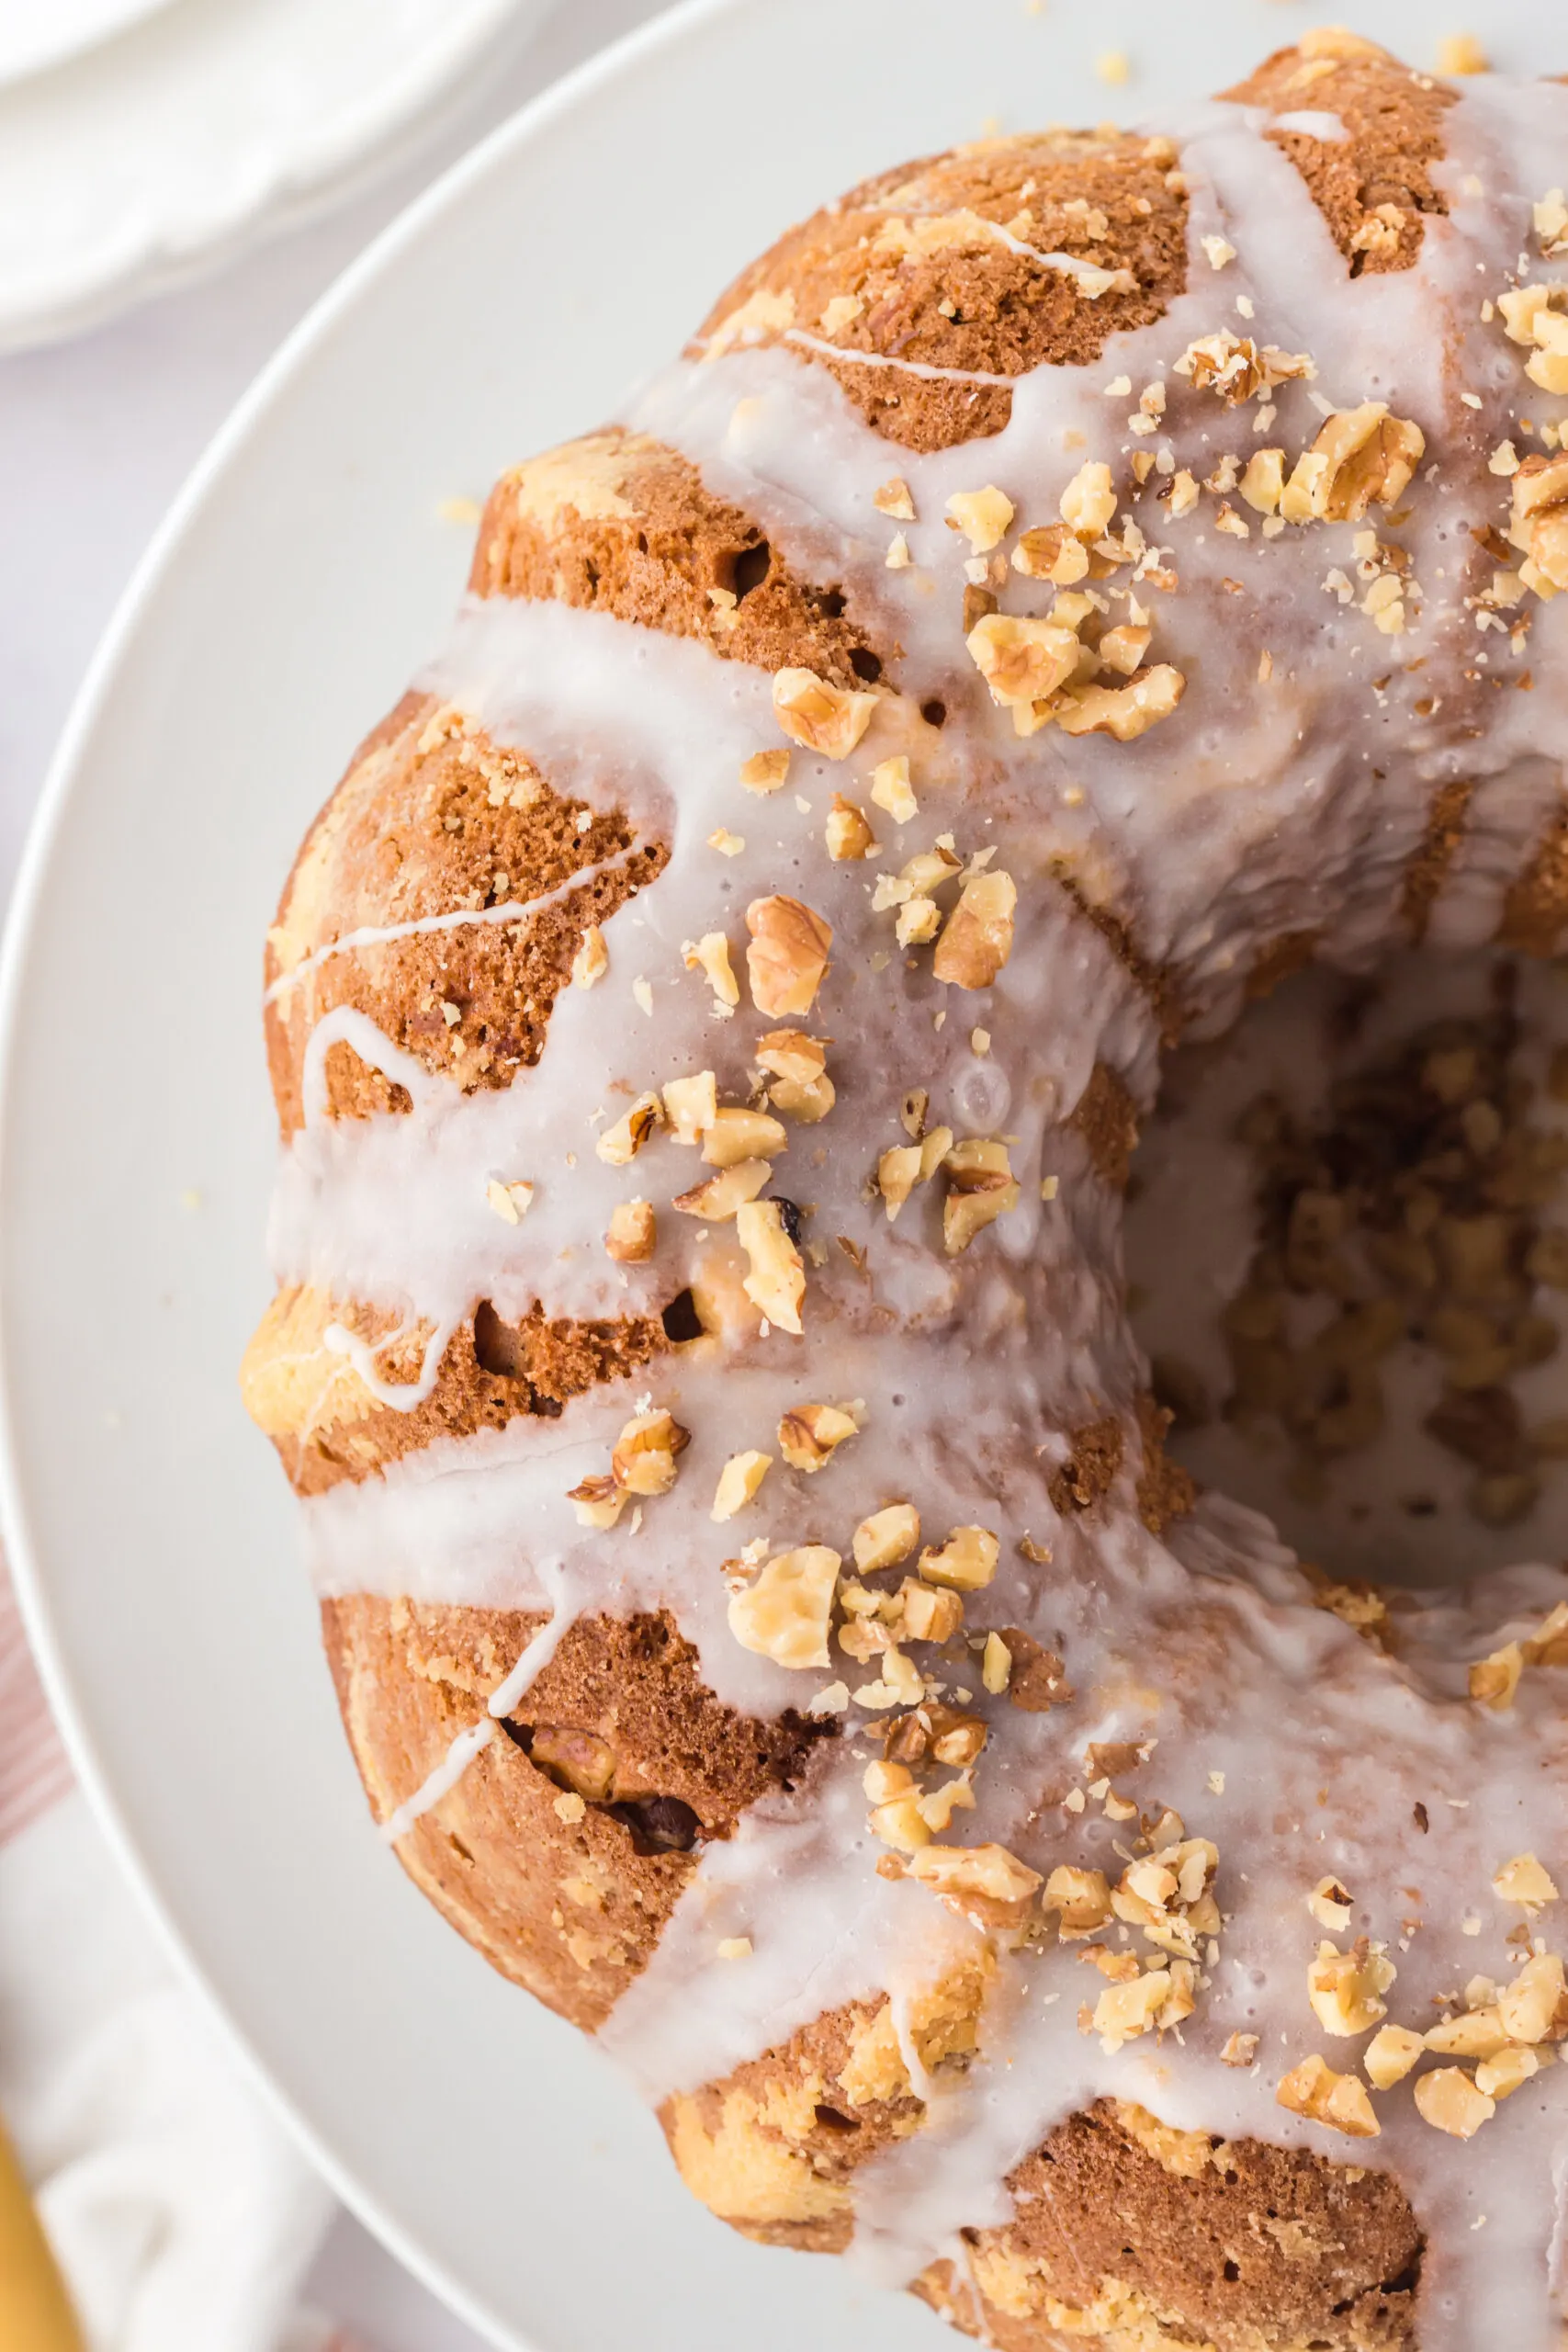 birds eye image of half of a maple walnut bundt cake on a white plate topped with chopped walnuts